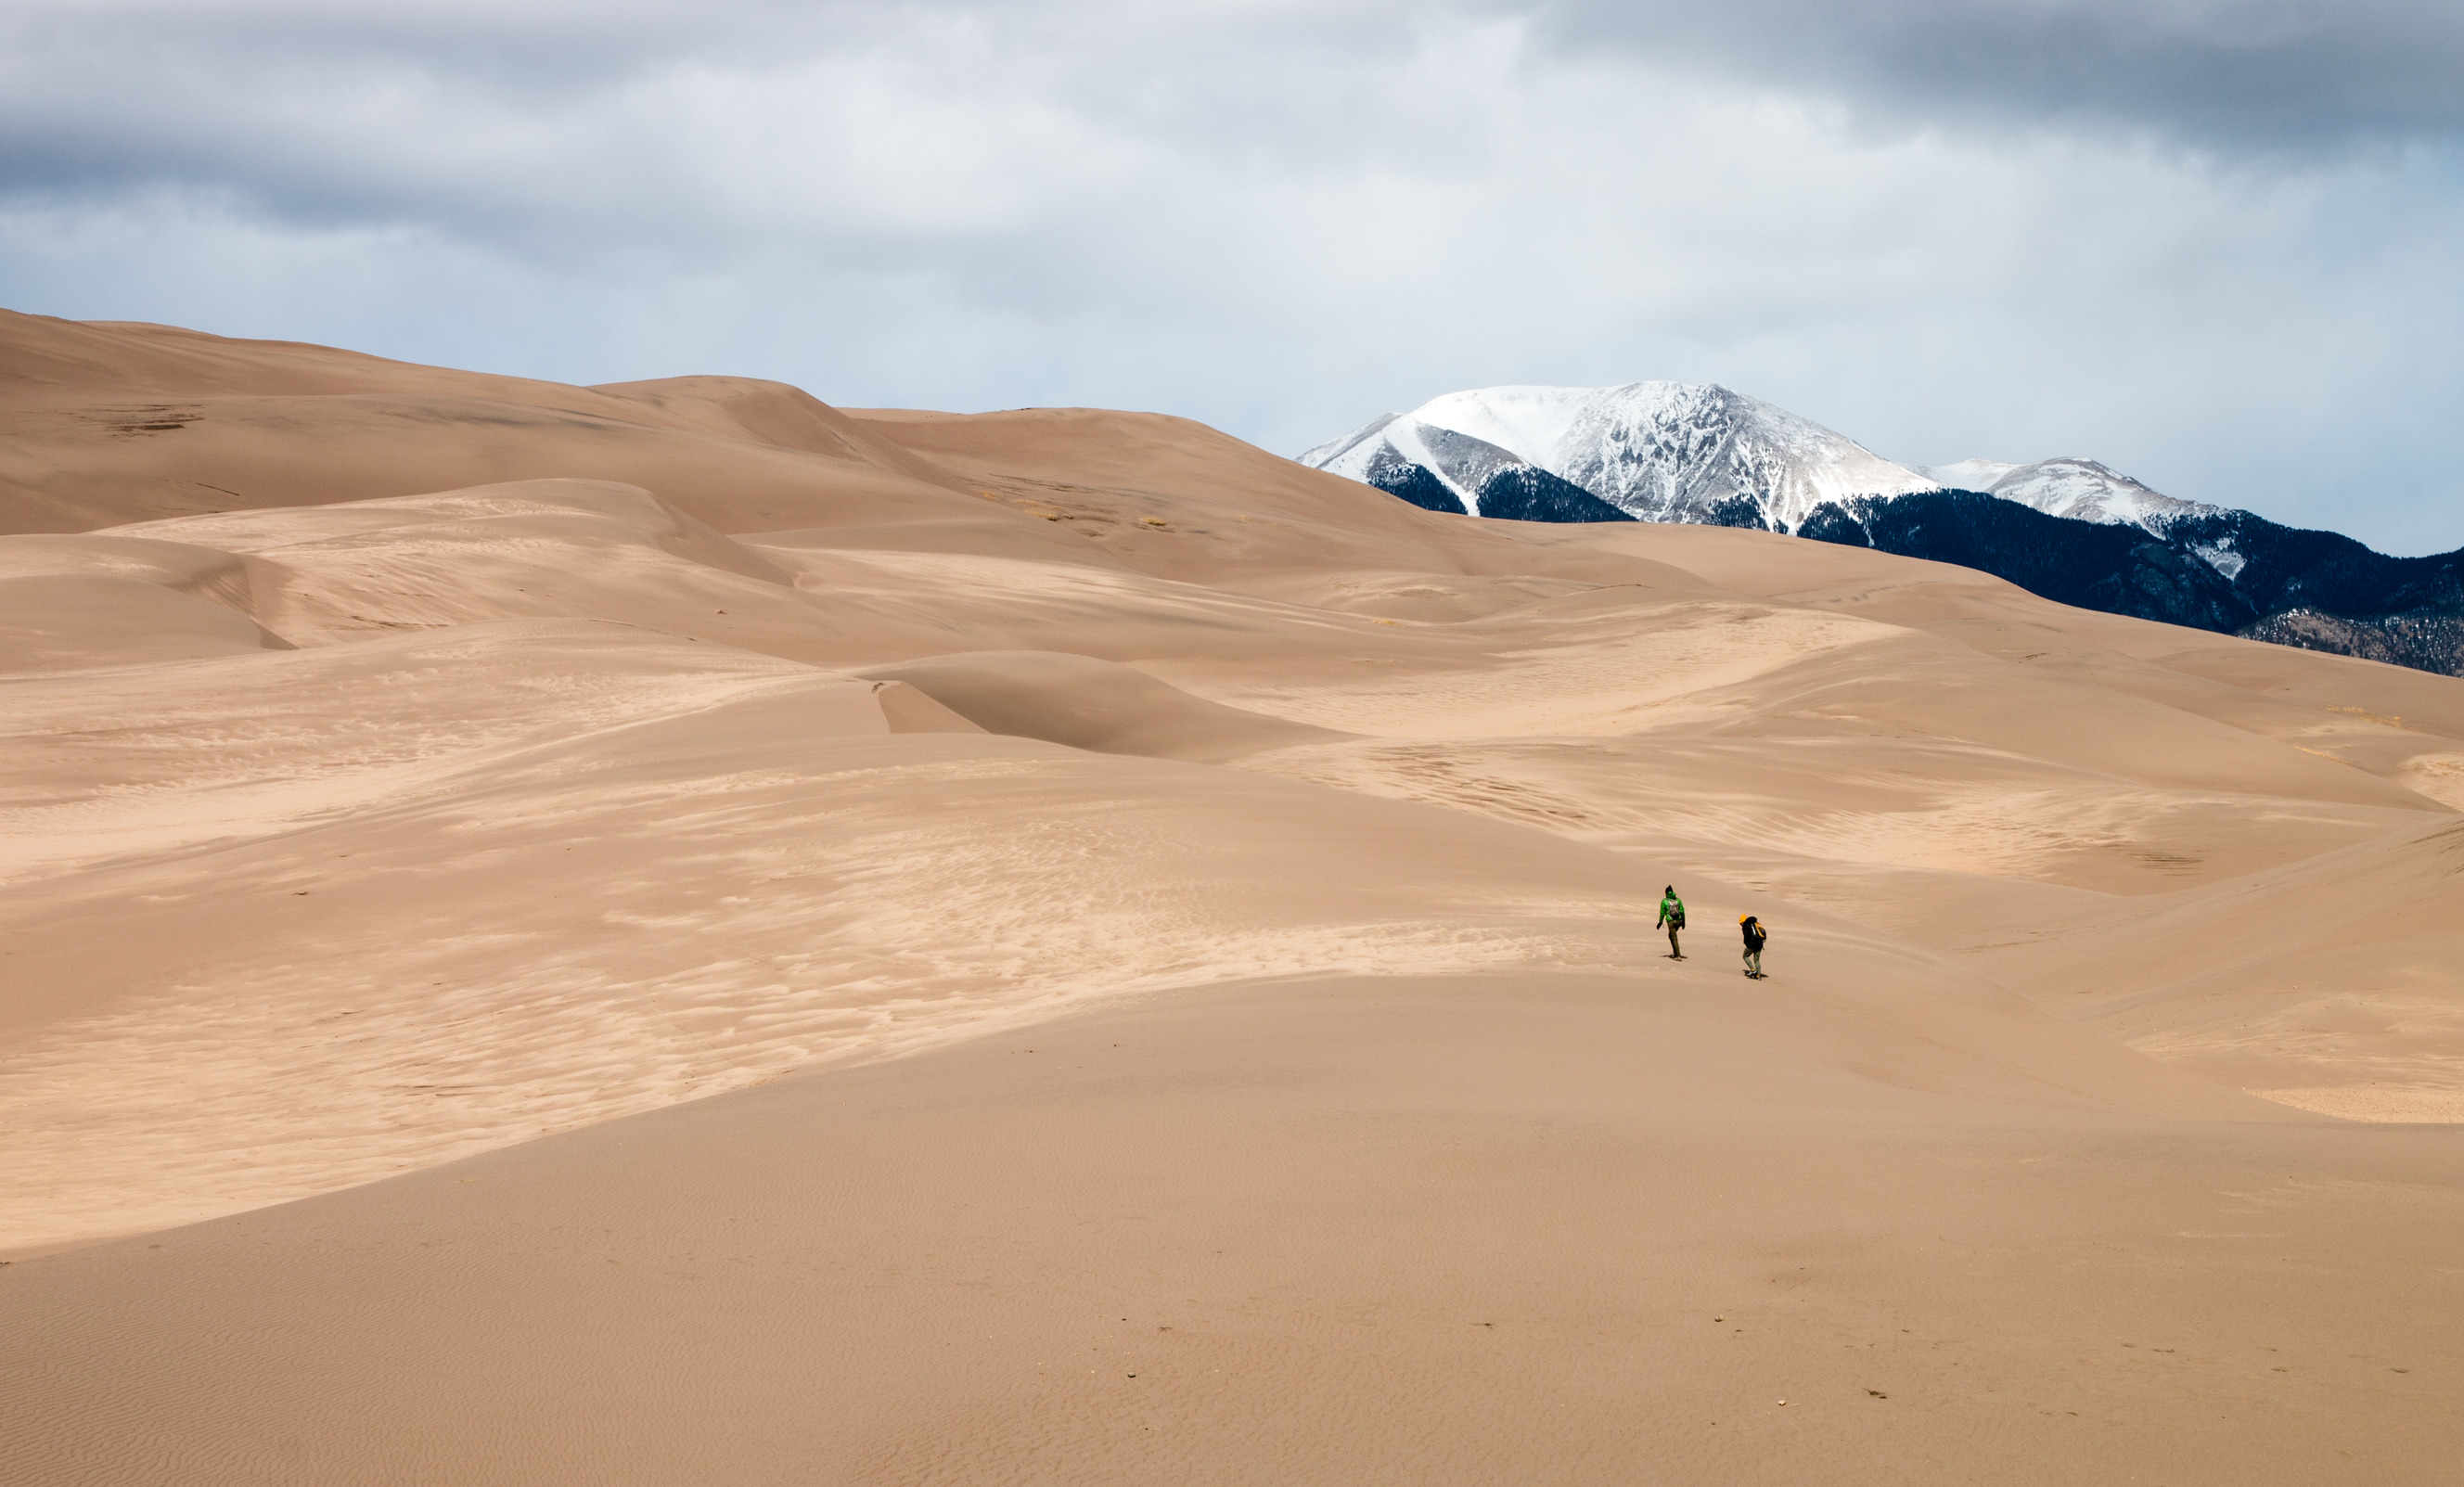 A couple of park visitors walk up the dunes. In the distance the snow-capped Sangre de Cristo Mountains rise above the dunes. 